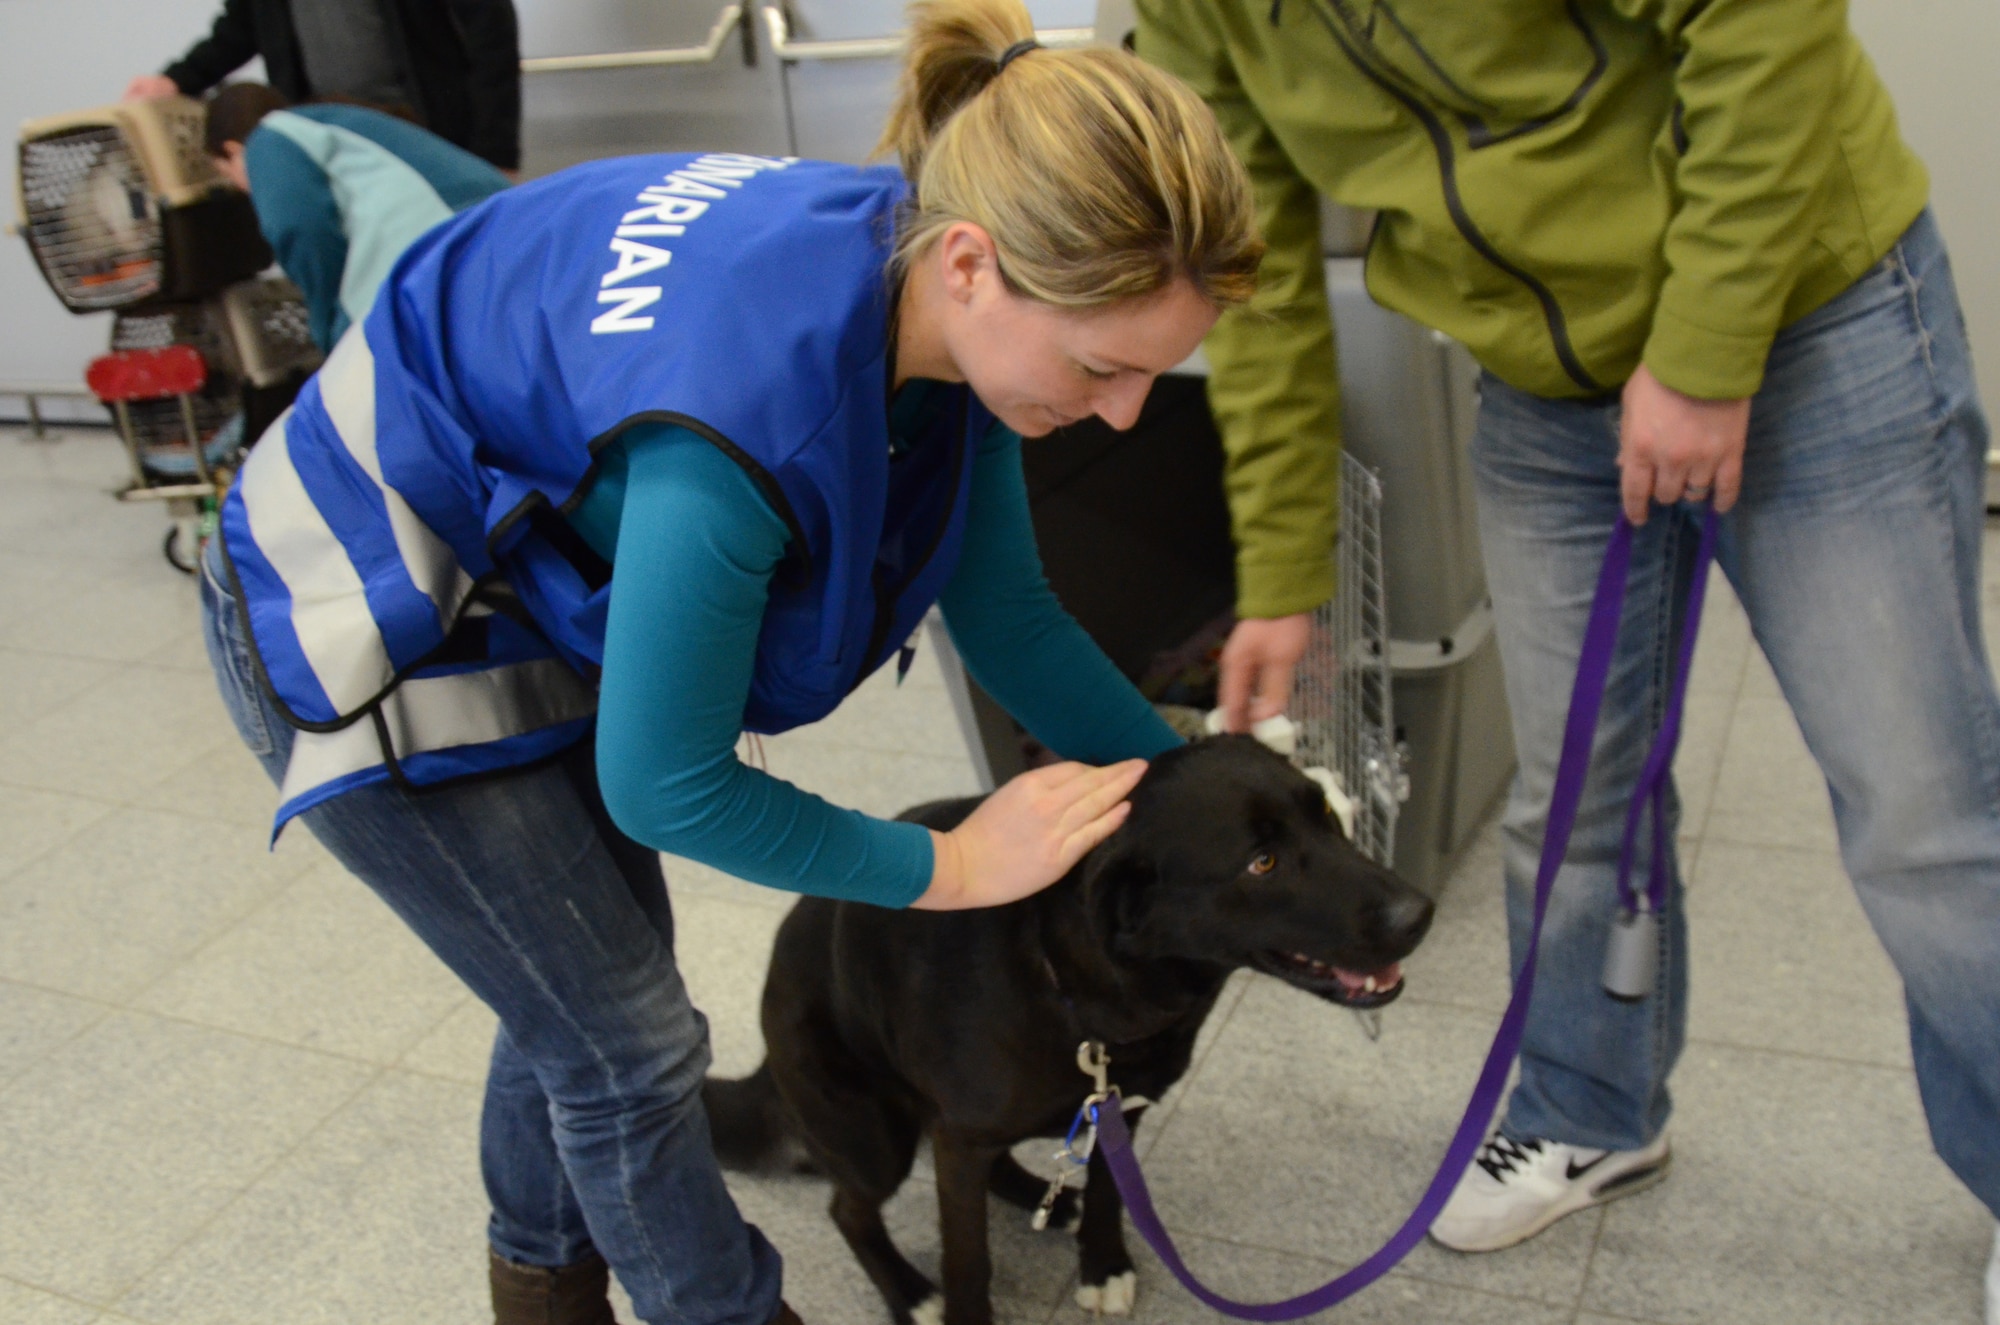 Dr. Jennifer Schiwek, veterinarian of the Kaiserslautern County Veterinary Office, examines Charlie Jan. 15 after arrival from the states at the Ramstein Passenger Terminal. The black Labrador mix is owned by Capt. Heath Hunter, who will be assigned to the 52nd Operations Group in Spangdahlem.  Starting Feb. 1, pet owners importing pets from non-European Union countries have to pay a pet fee of €55. (U.S. Air Force photo/2nd Lt. Kay M. Nissen)